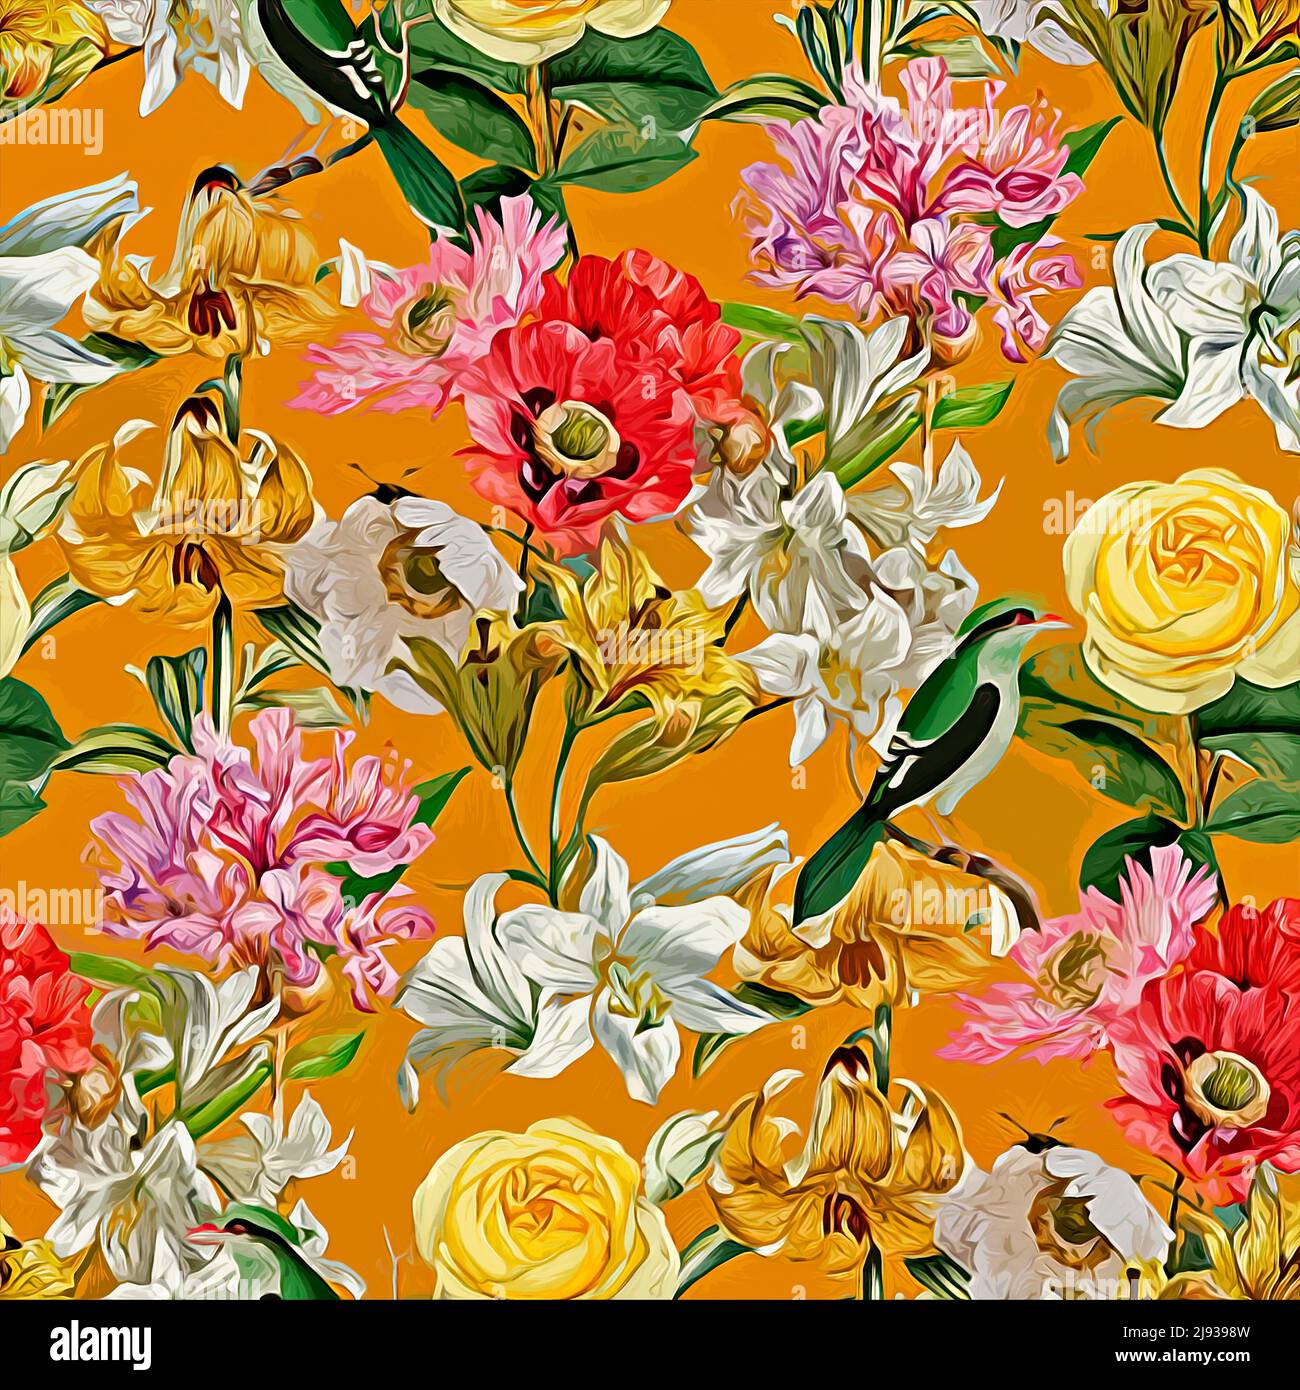 Textile and wallpaper patterns. A printable digital illustration work.  Floral Print designs Stock Photo - Alamy